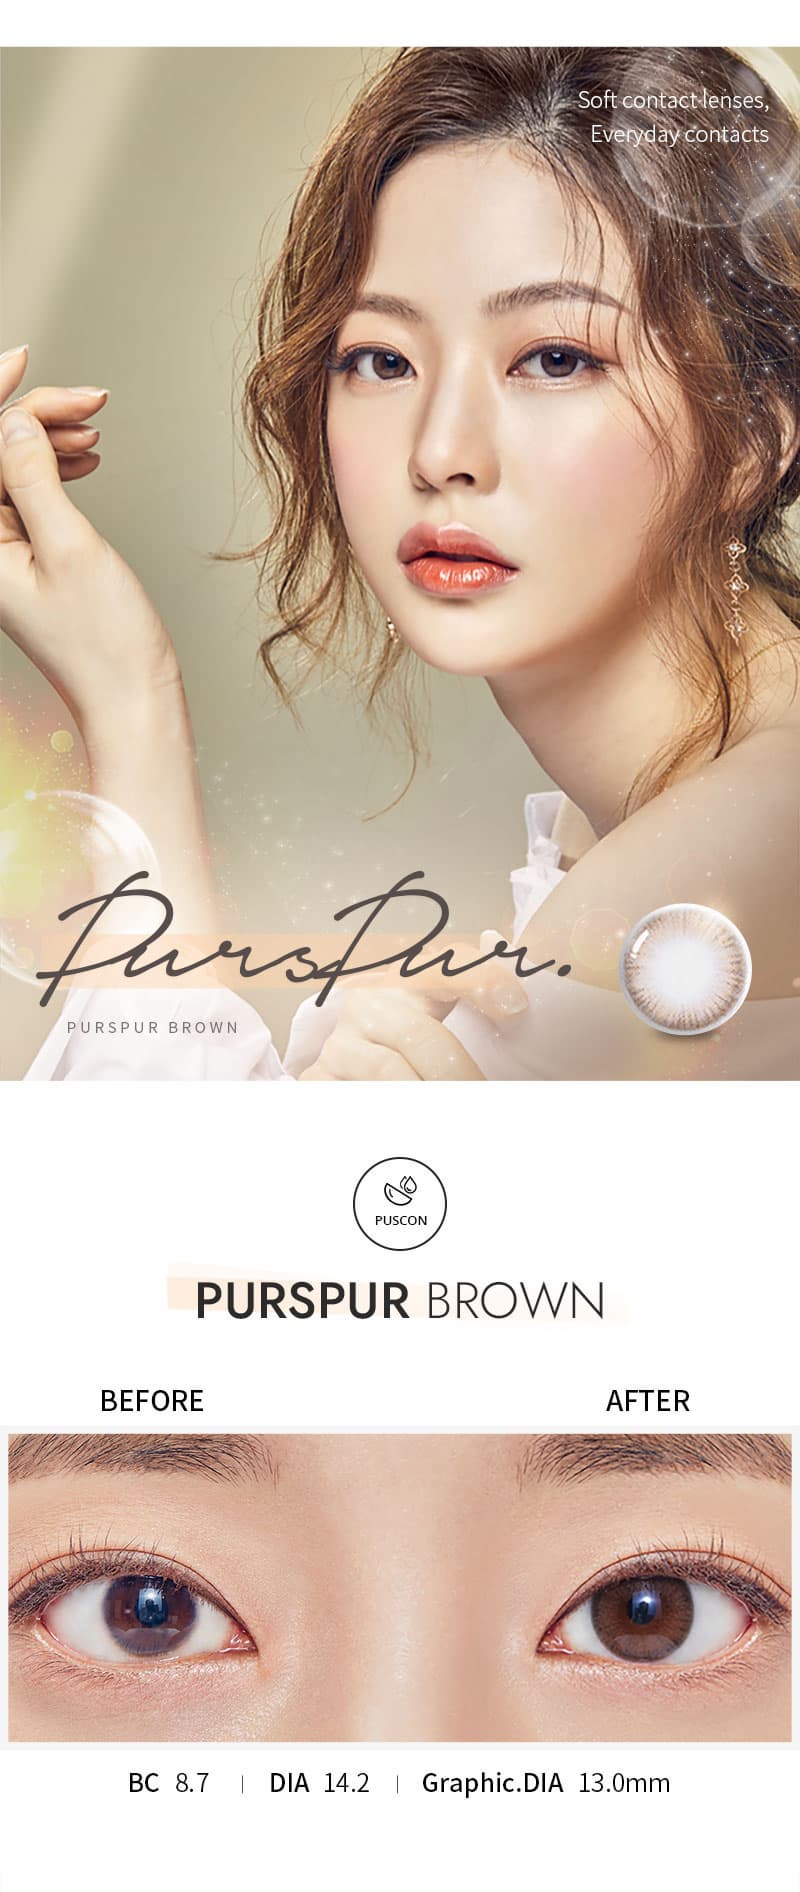 Contact Lens _Purspur Brown_